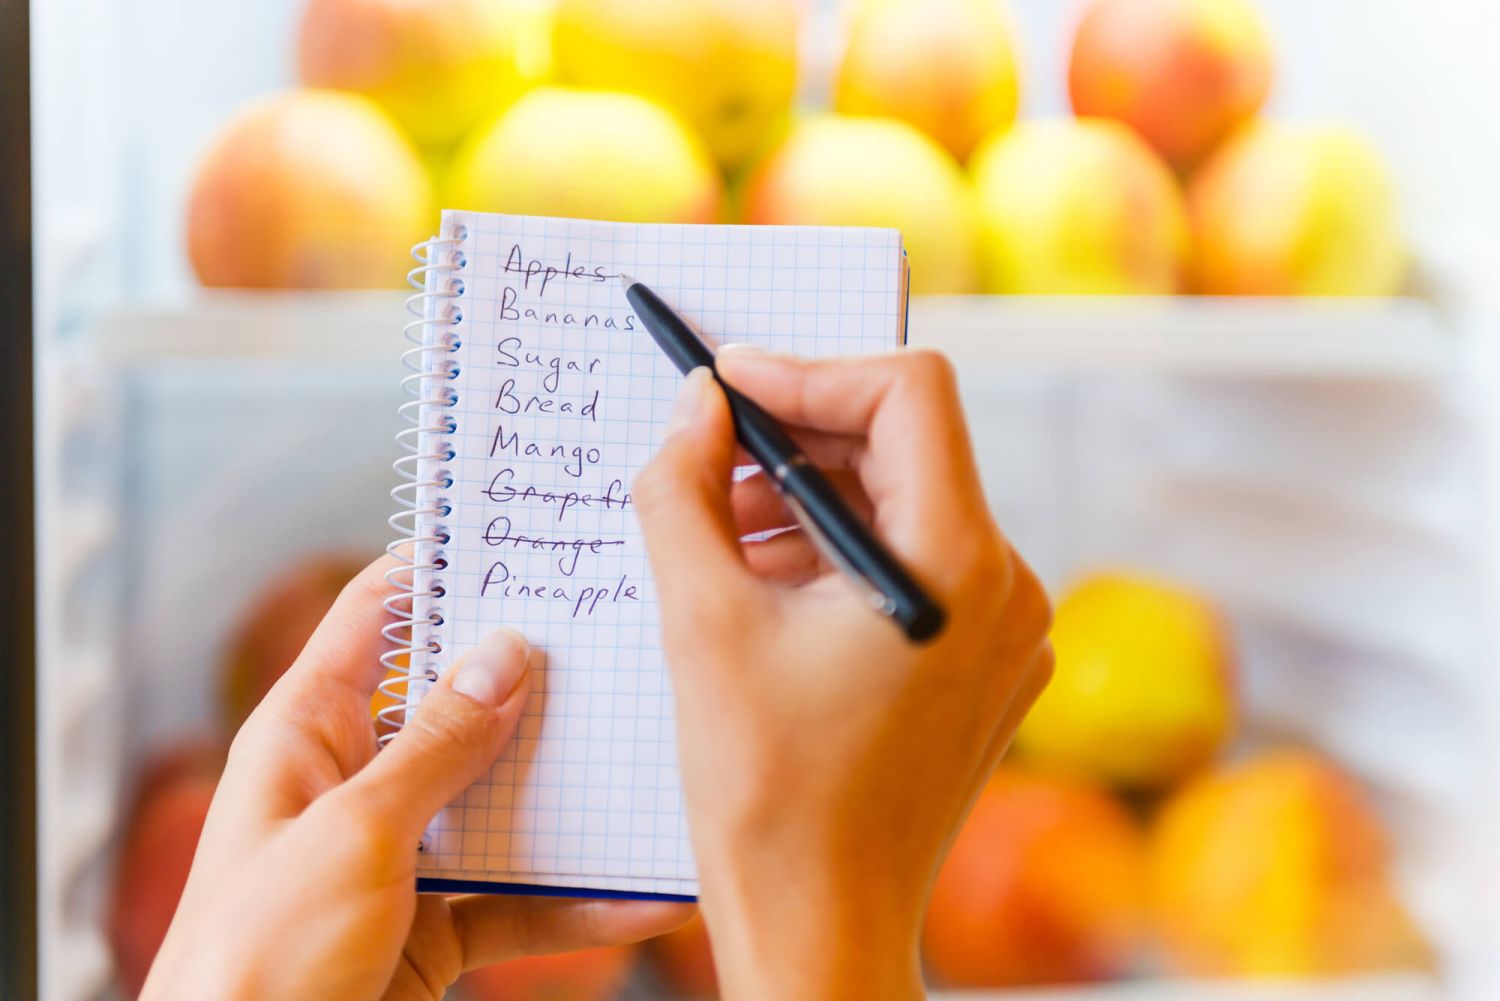 Shopping list for a healthy meal plan with fruit in the background.